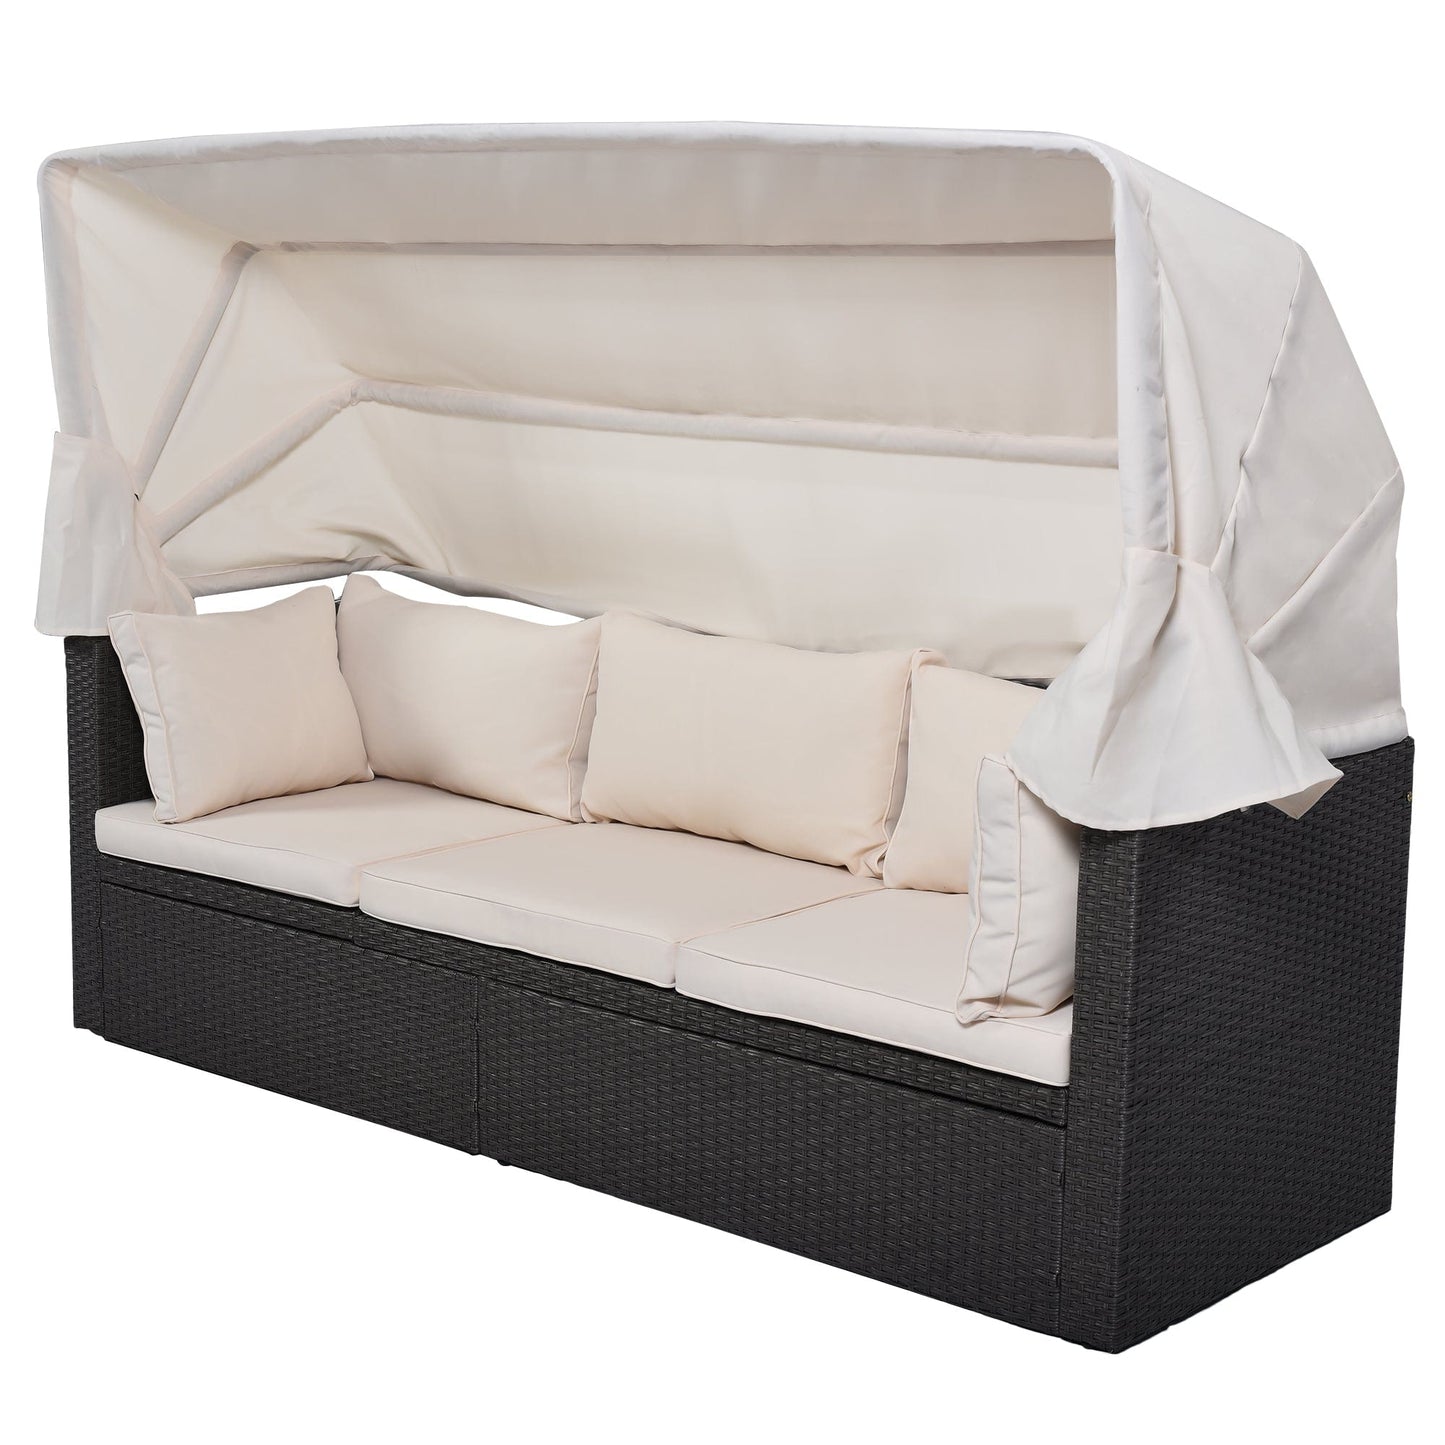 1st Choice Furniture Direct Daybed 1st Choice U-Style Daybed with Retractable Canopy and Washable Cushion